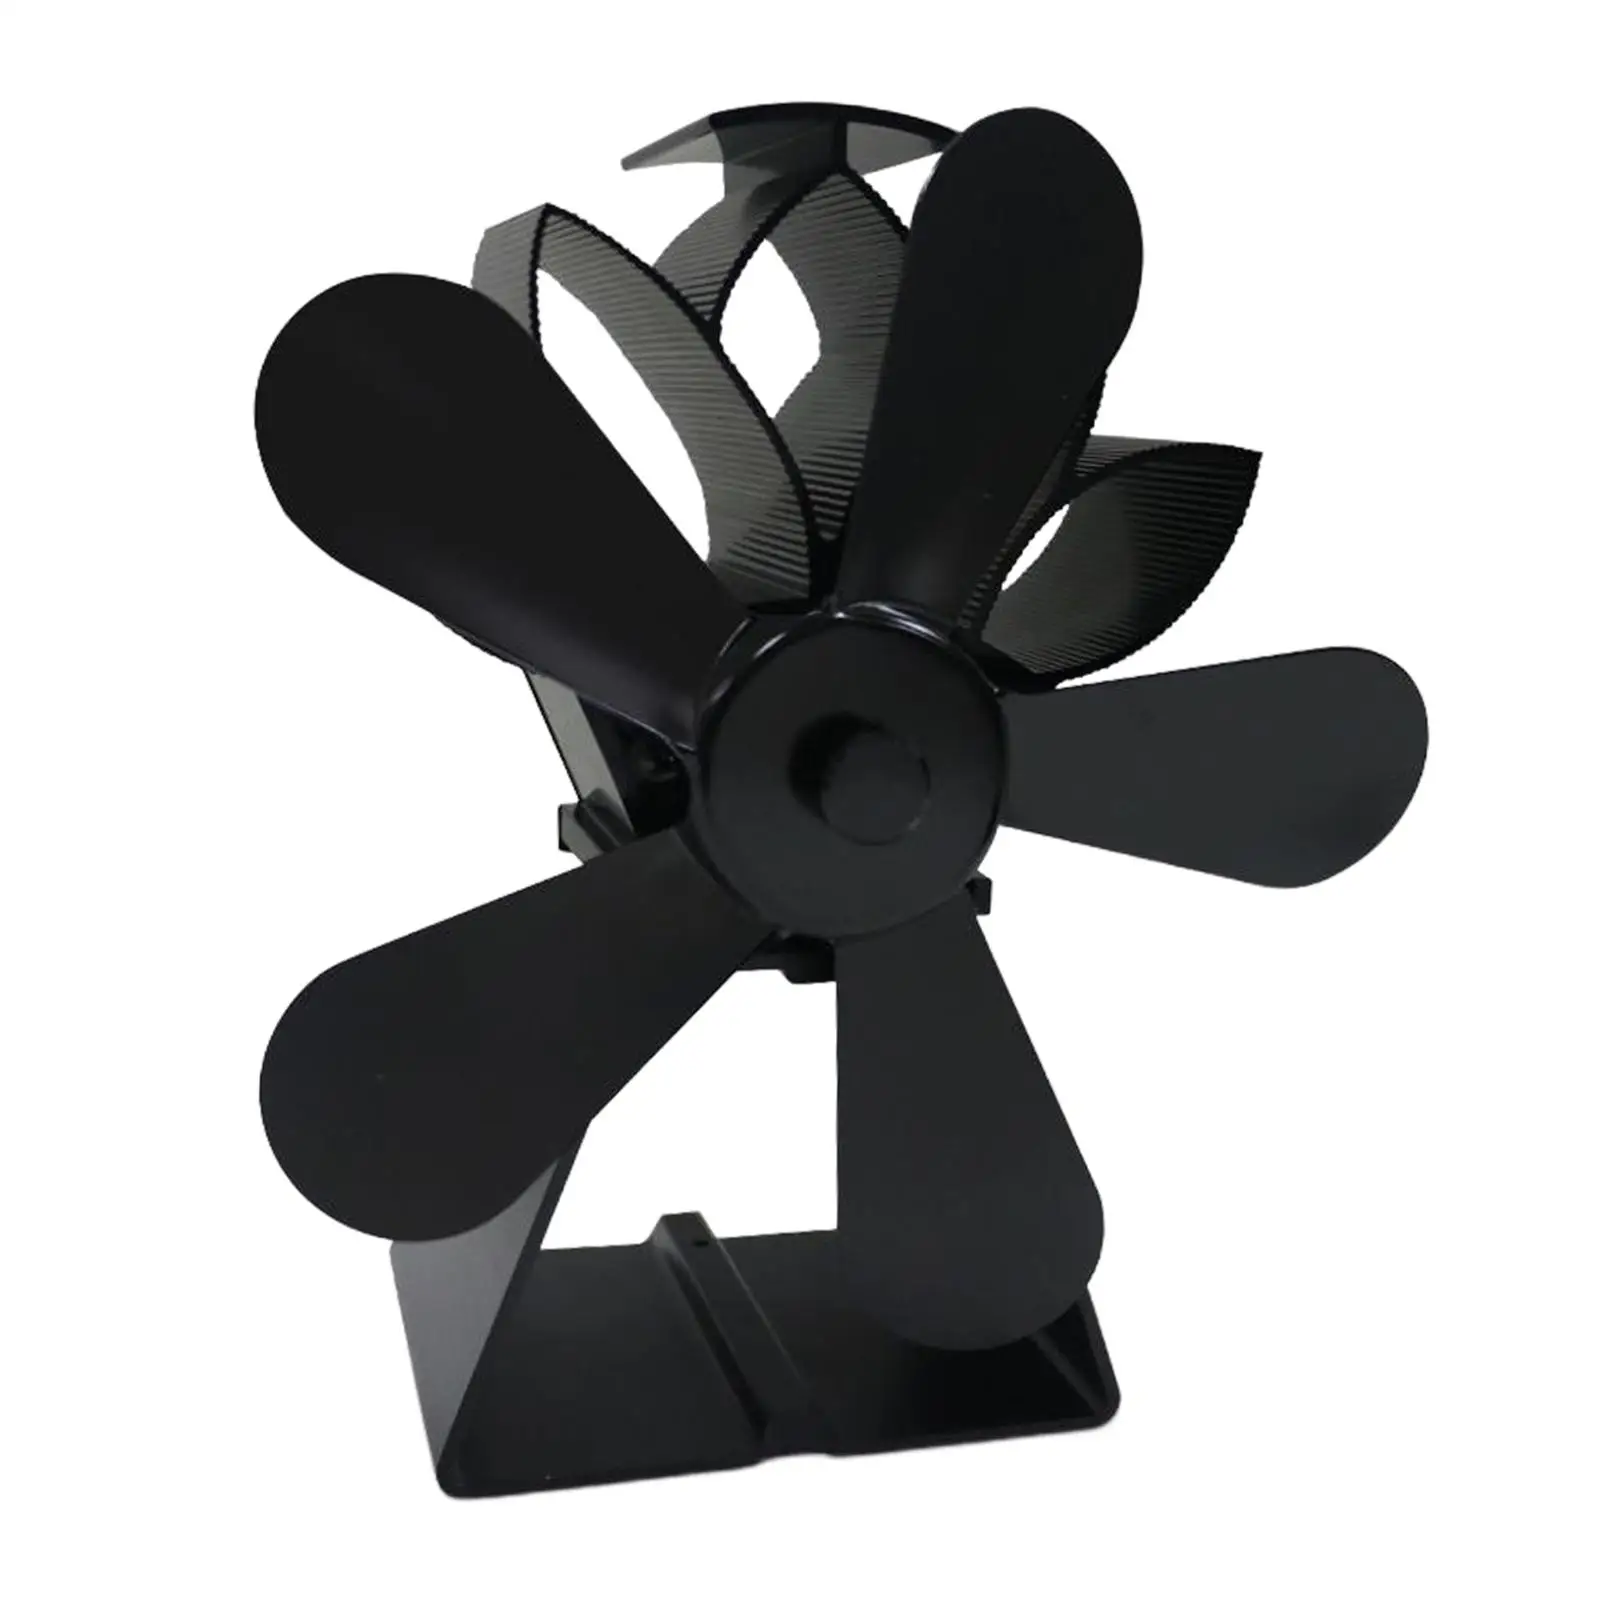 Five Vanes Fireplace Fan, Wood Log Burner Household Circulates Warm Save Fuel, Eco Fan Non Electric Heat Powered Stovetop Fan